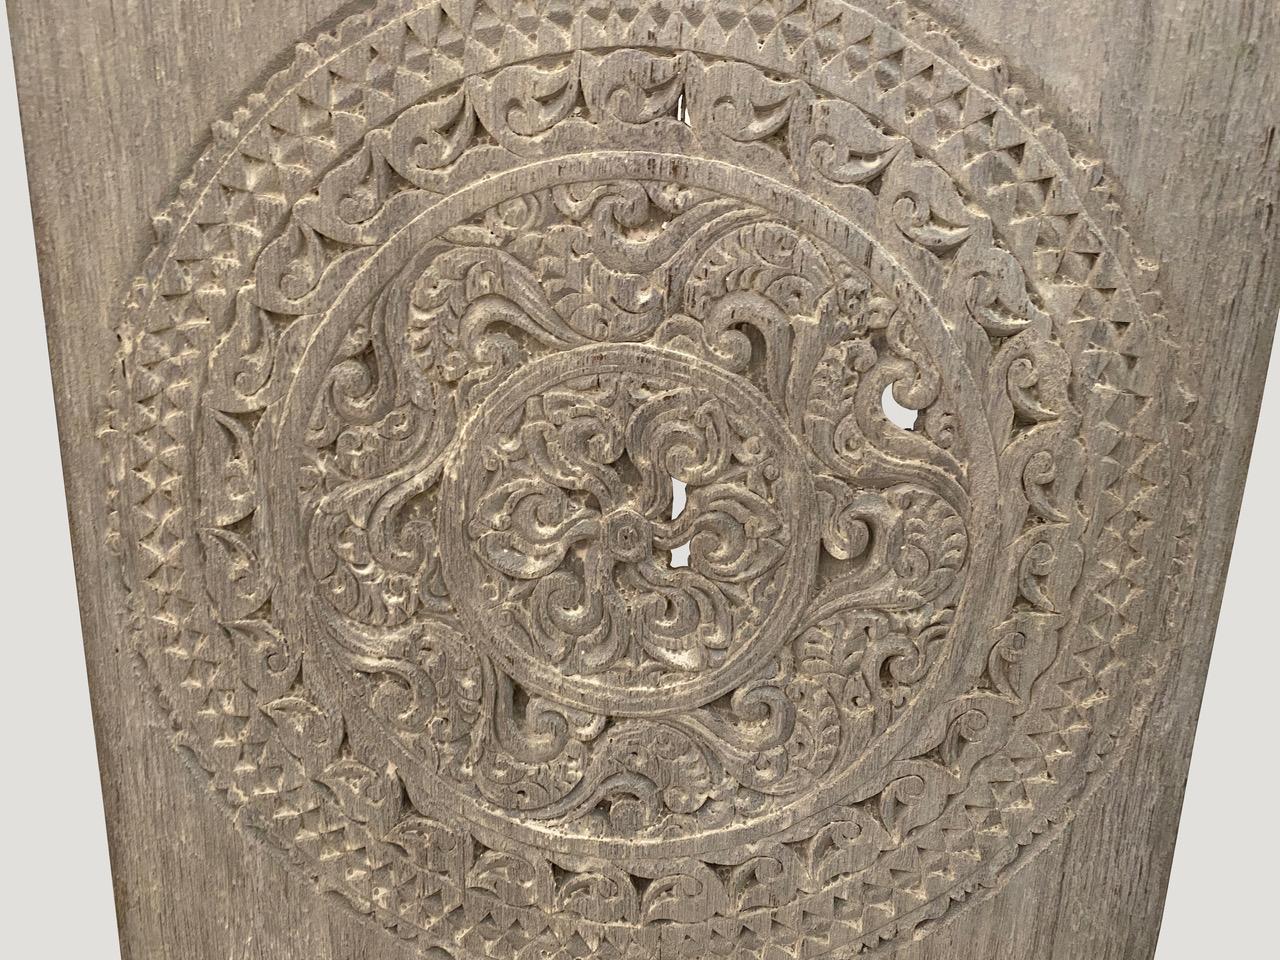 Antique hand carved merbau wood panel from Lampung, Sumatra. We have a collection in various sizes. Please inquire. The size and price reflect the one shown. Stunning on both sides.

This panel was sourced in the spirit of wabi sabi, a Japanese